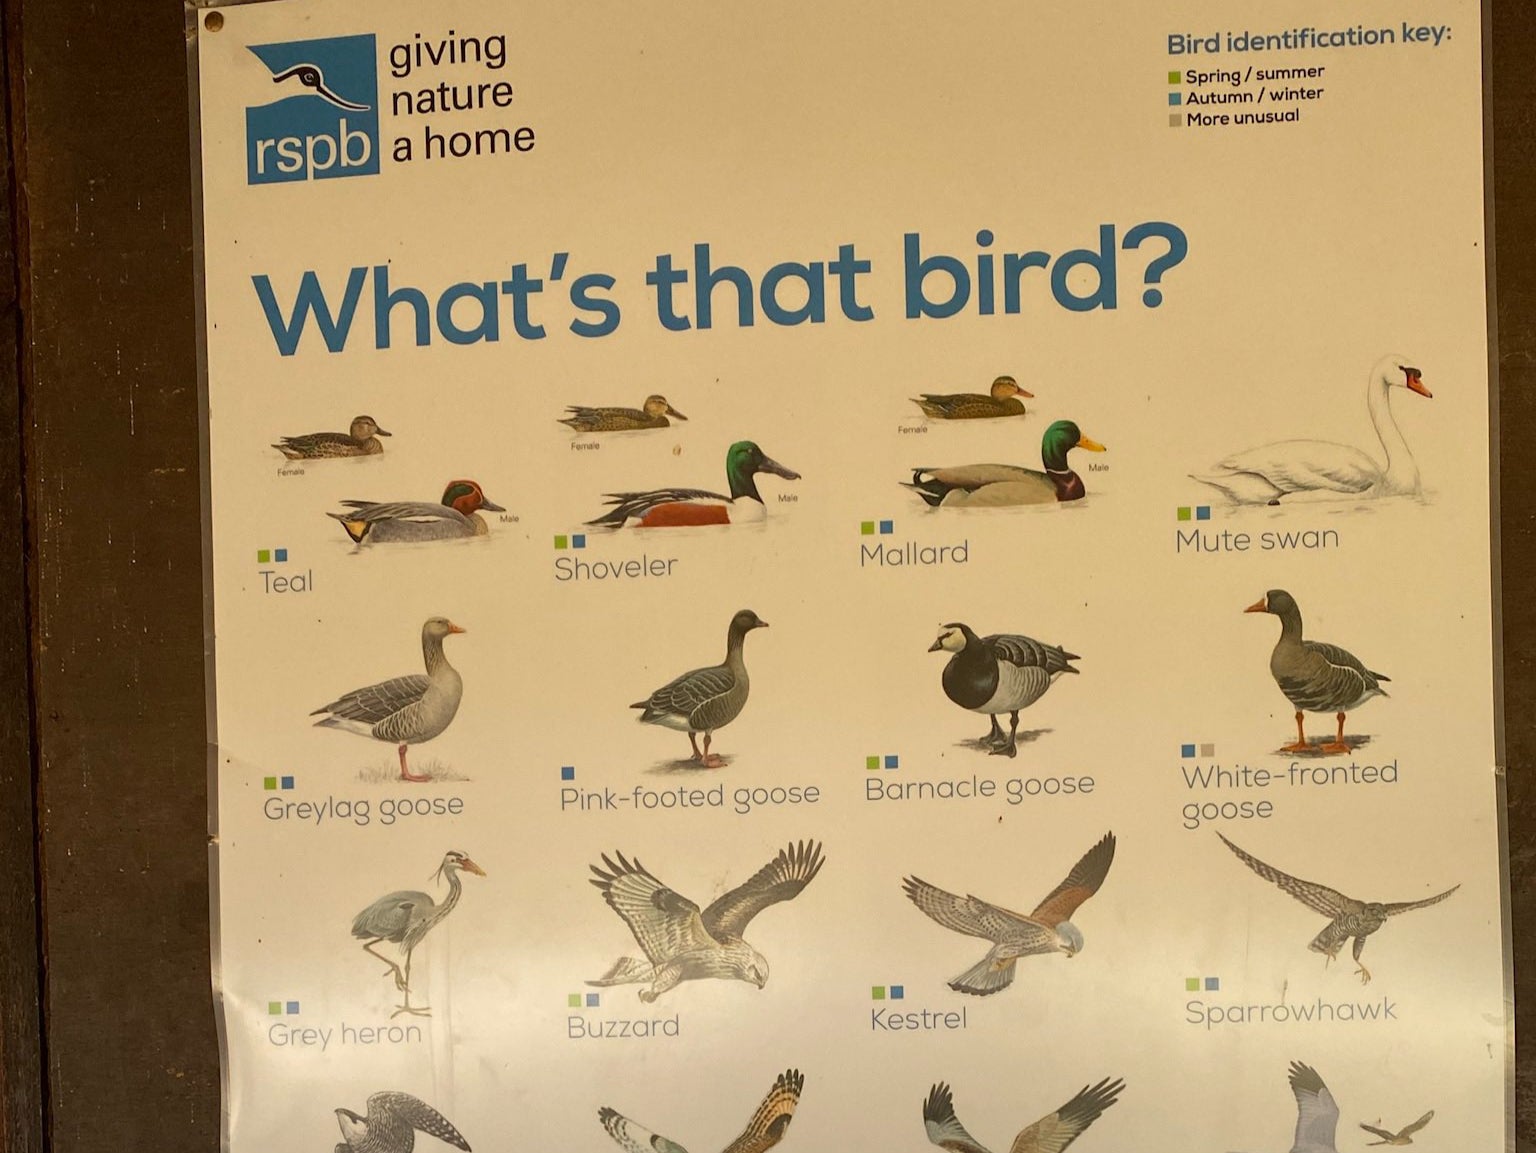 A photo of an RSPB bird-identifier poster that shows small inset photos of female birds alongside larger photos of their male counterparts